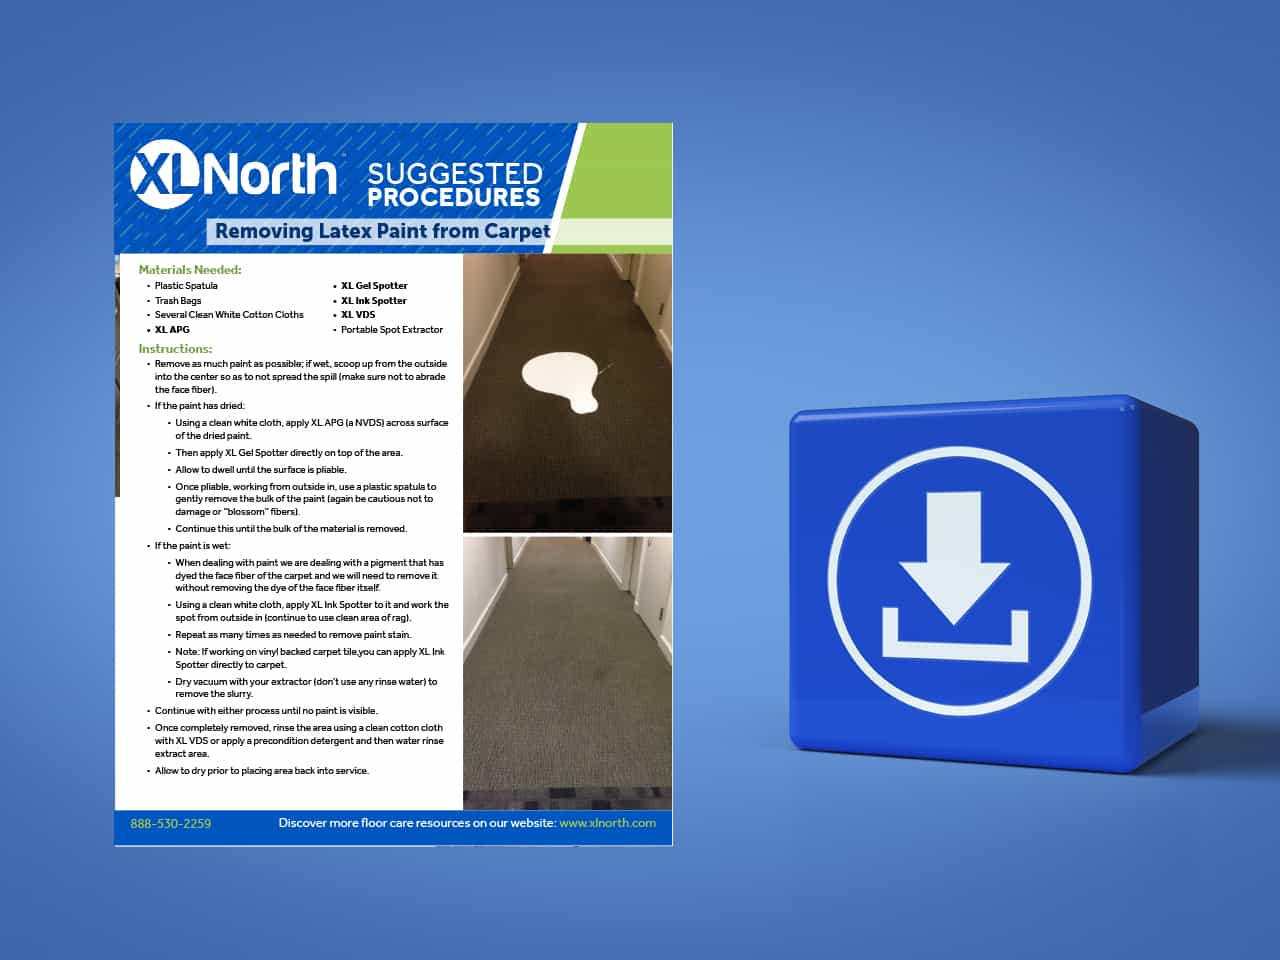 XL North Suggested Procedures: Remove Latex Paint from Carpet